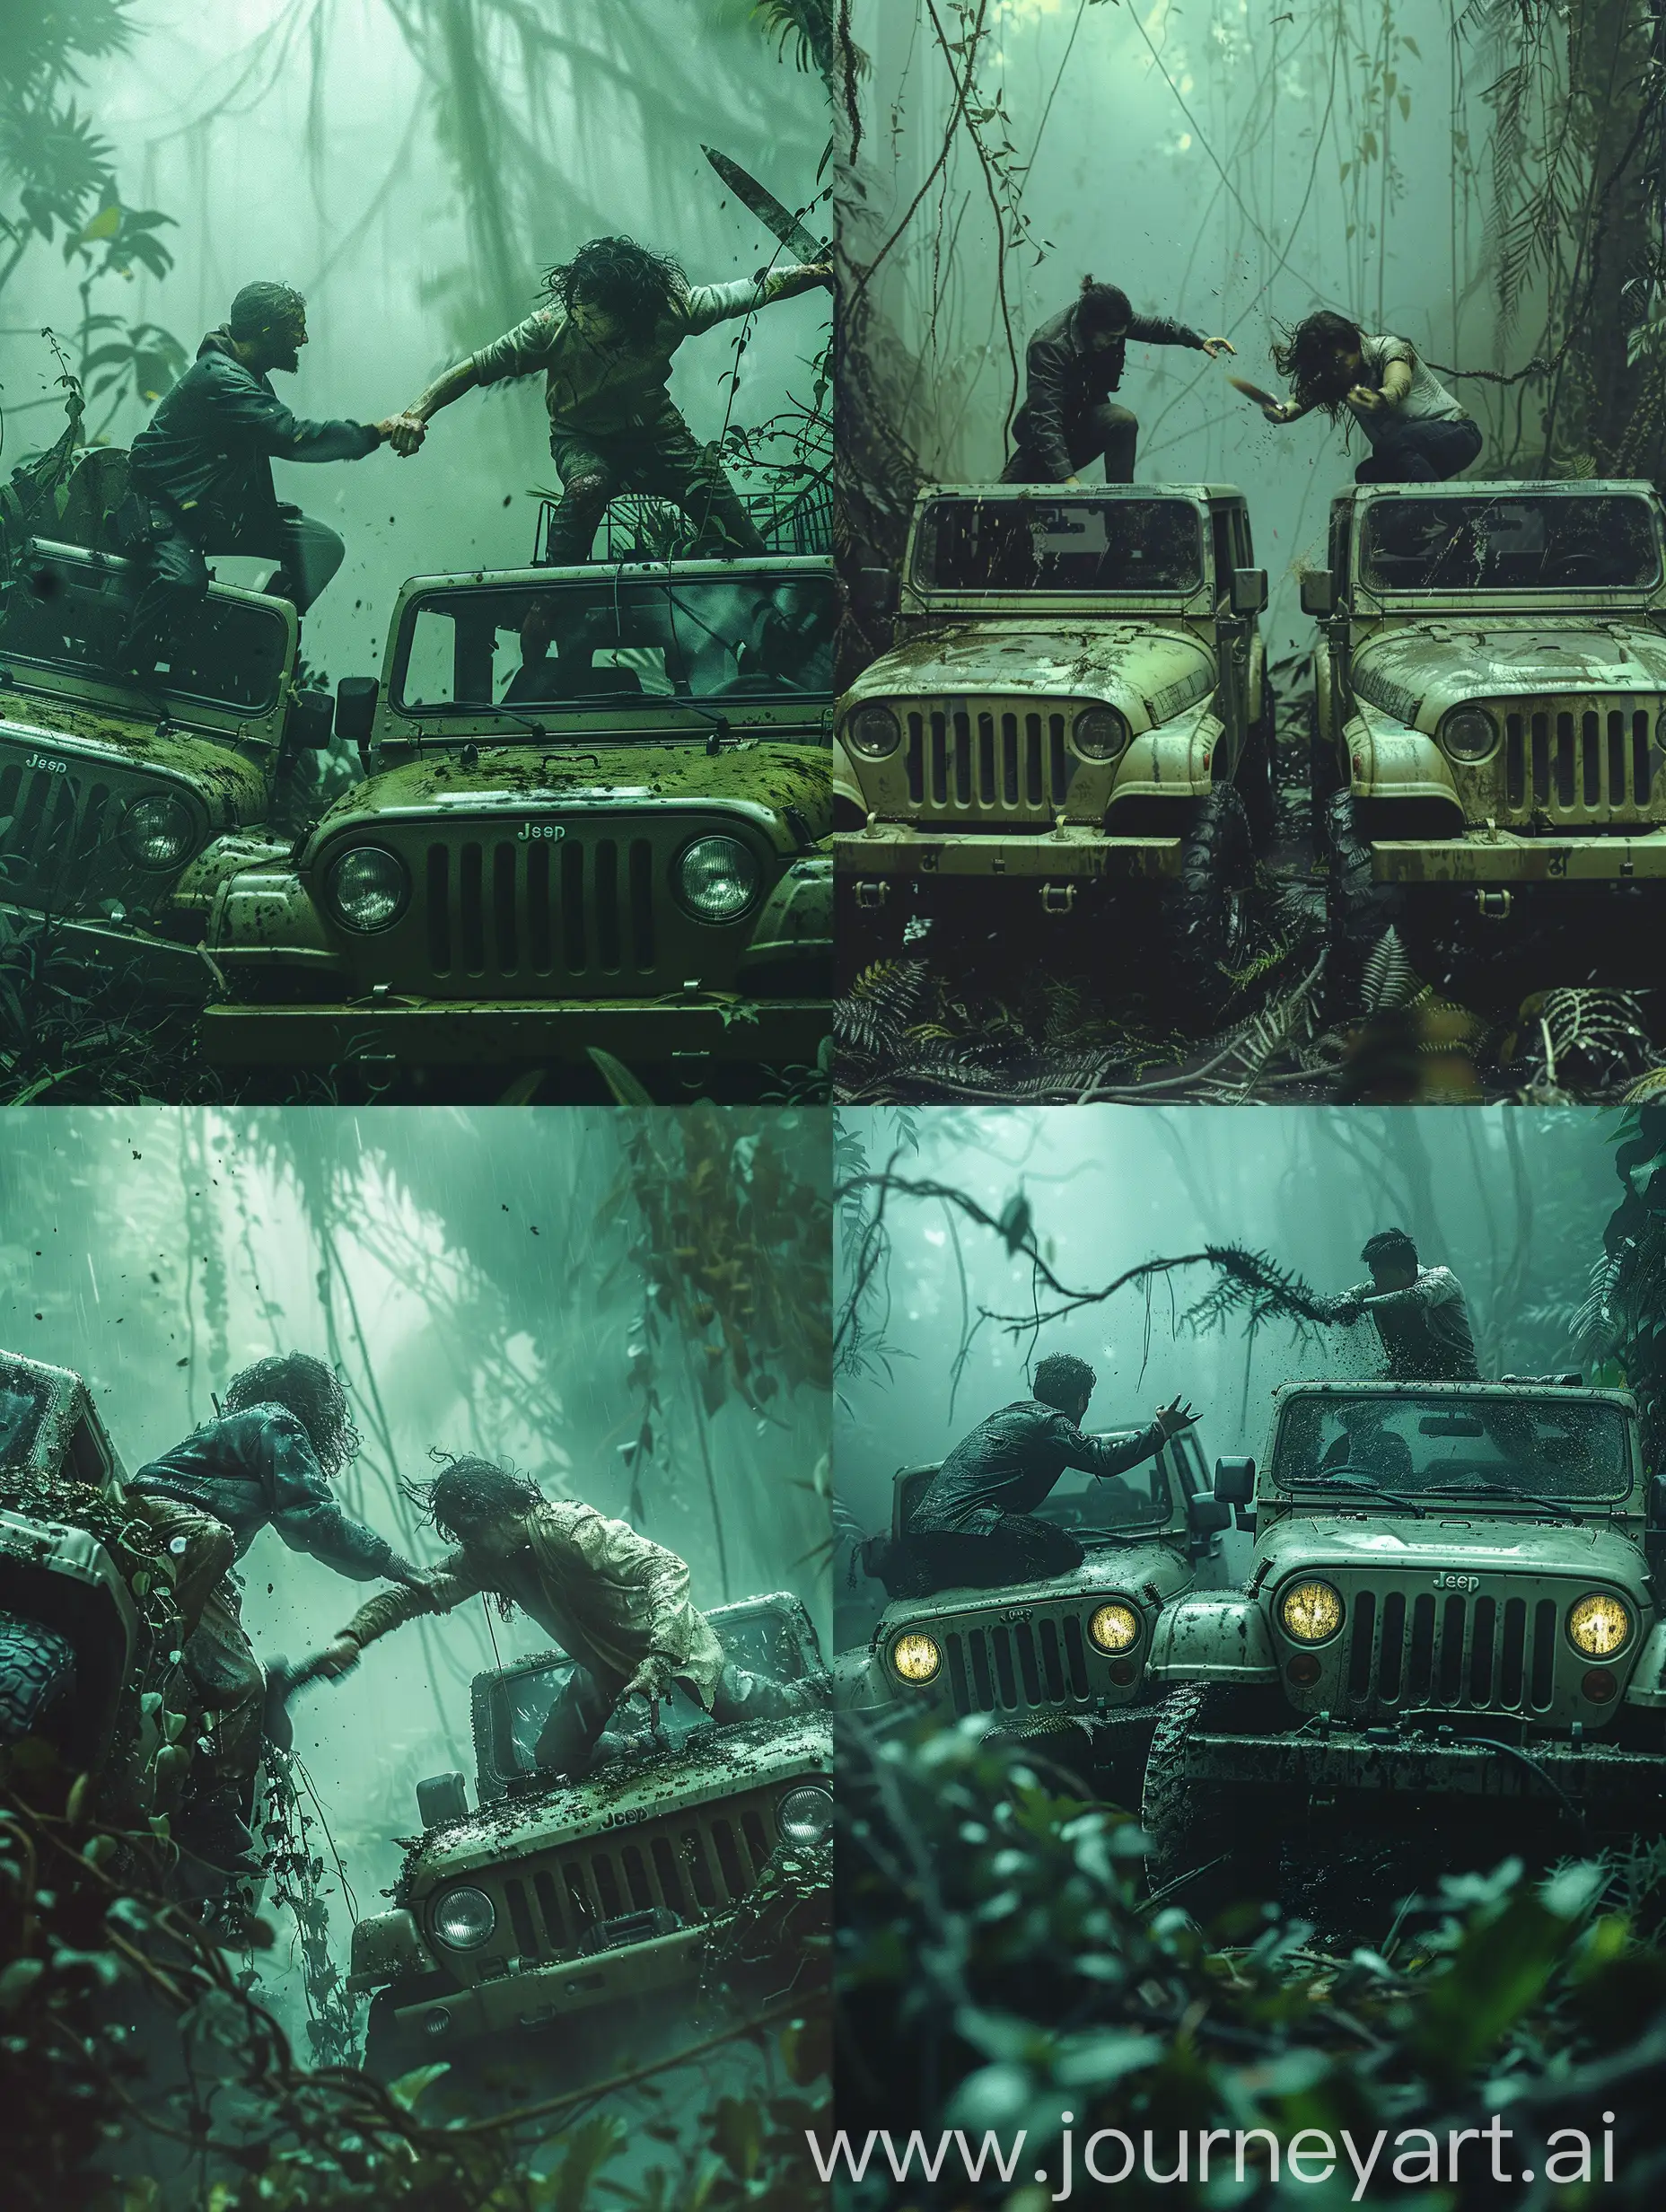 Two characters are in the midst of a physical confrontation on top of two olive-green military-style vehicles. These vehicles appear to be jeeps and are parked side by side, surrounded by dense jungle vegetation, which suggests the setting is in a tropical rainforest or similar environment.

The character on the left is wearing a dark jacket and seems to be in a defensive posture, attempting to fend off an attack or possibly retaliate against the character on the right. The character on the right is wearing lighter-colored clothing, notably a white long-sleeve shirt, and is swinging what looks like a machete or a large knife toward the other character.

There is a sense of urgency and aggression in the scene; both characters are fully engaged in the fight. The blurred background and the motion blur on the attacking character's arm with the weapon indicate a fast-paced action. The presence of the vines and foliage engulfing the vehicles adds to the impression that this confrontation is taking place in a remote or wild location.

The lighting and the high-quality resolution of the image suggest that this is a professionally shot scene, and the framing is such that it captures the energy and motion of the moment effectively. The overall composition communicates tension and imminent danger --style raw --stylize 750.